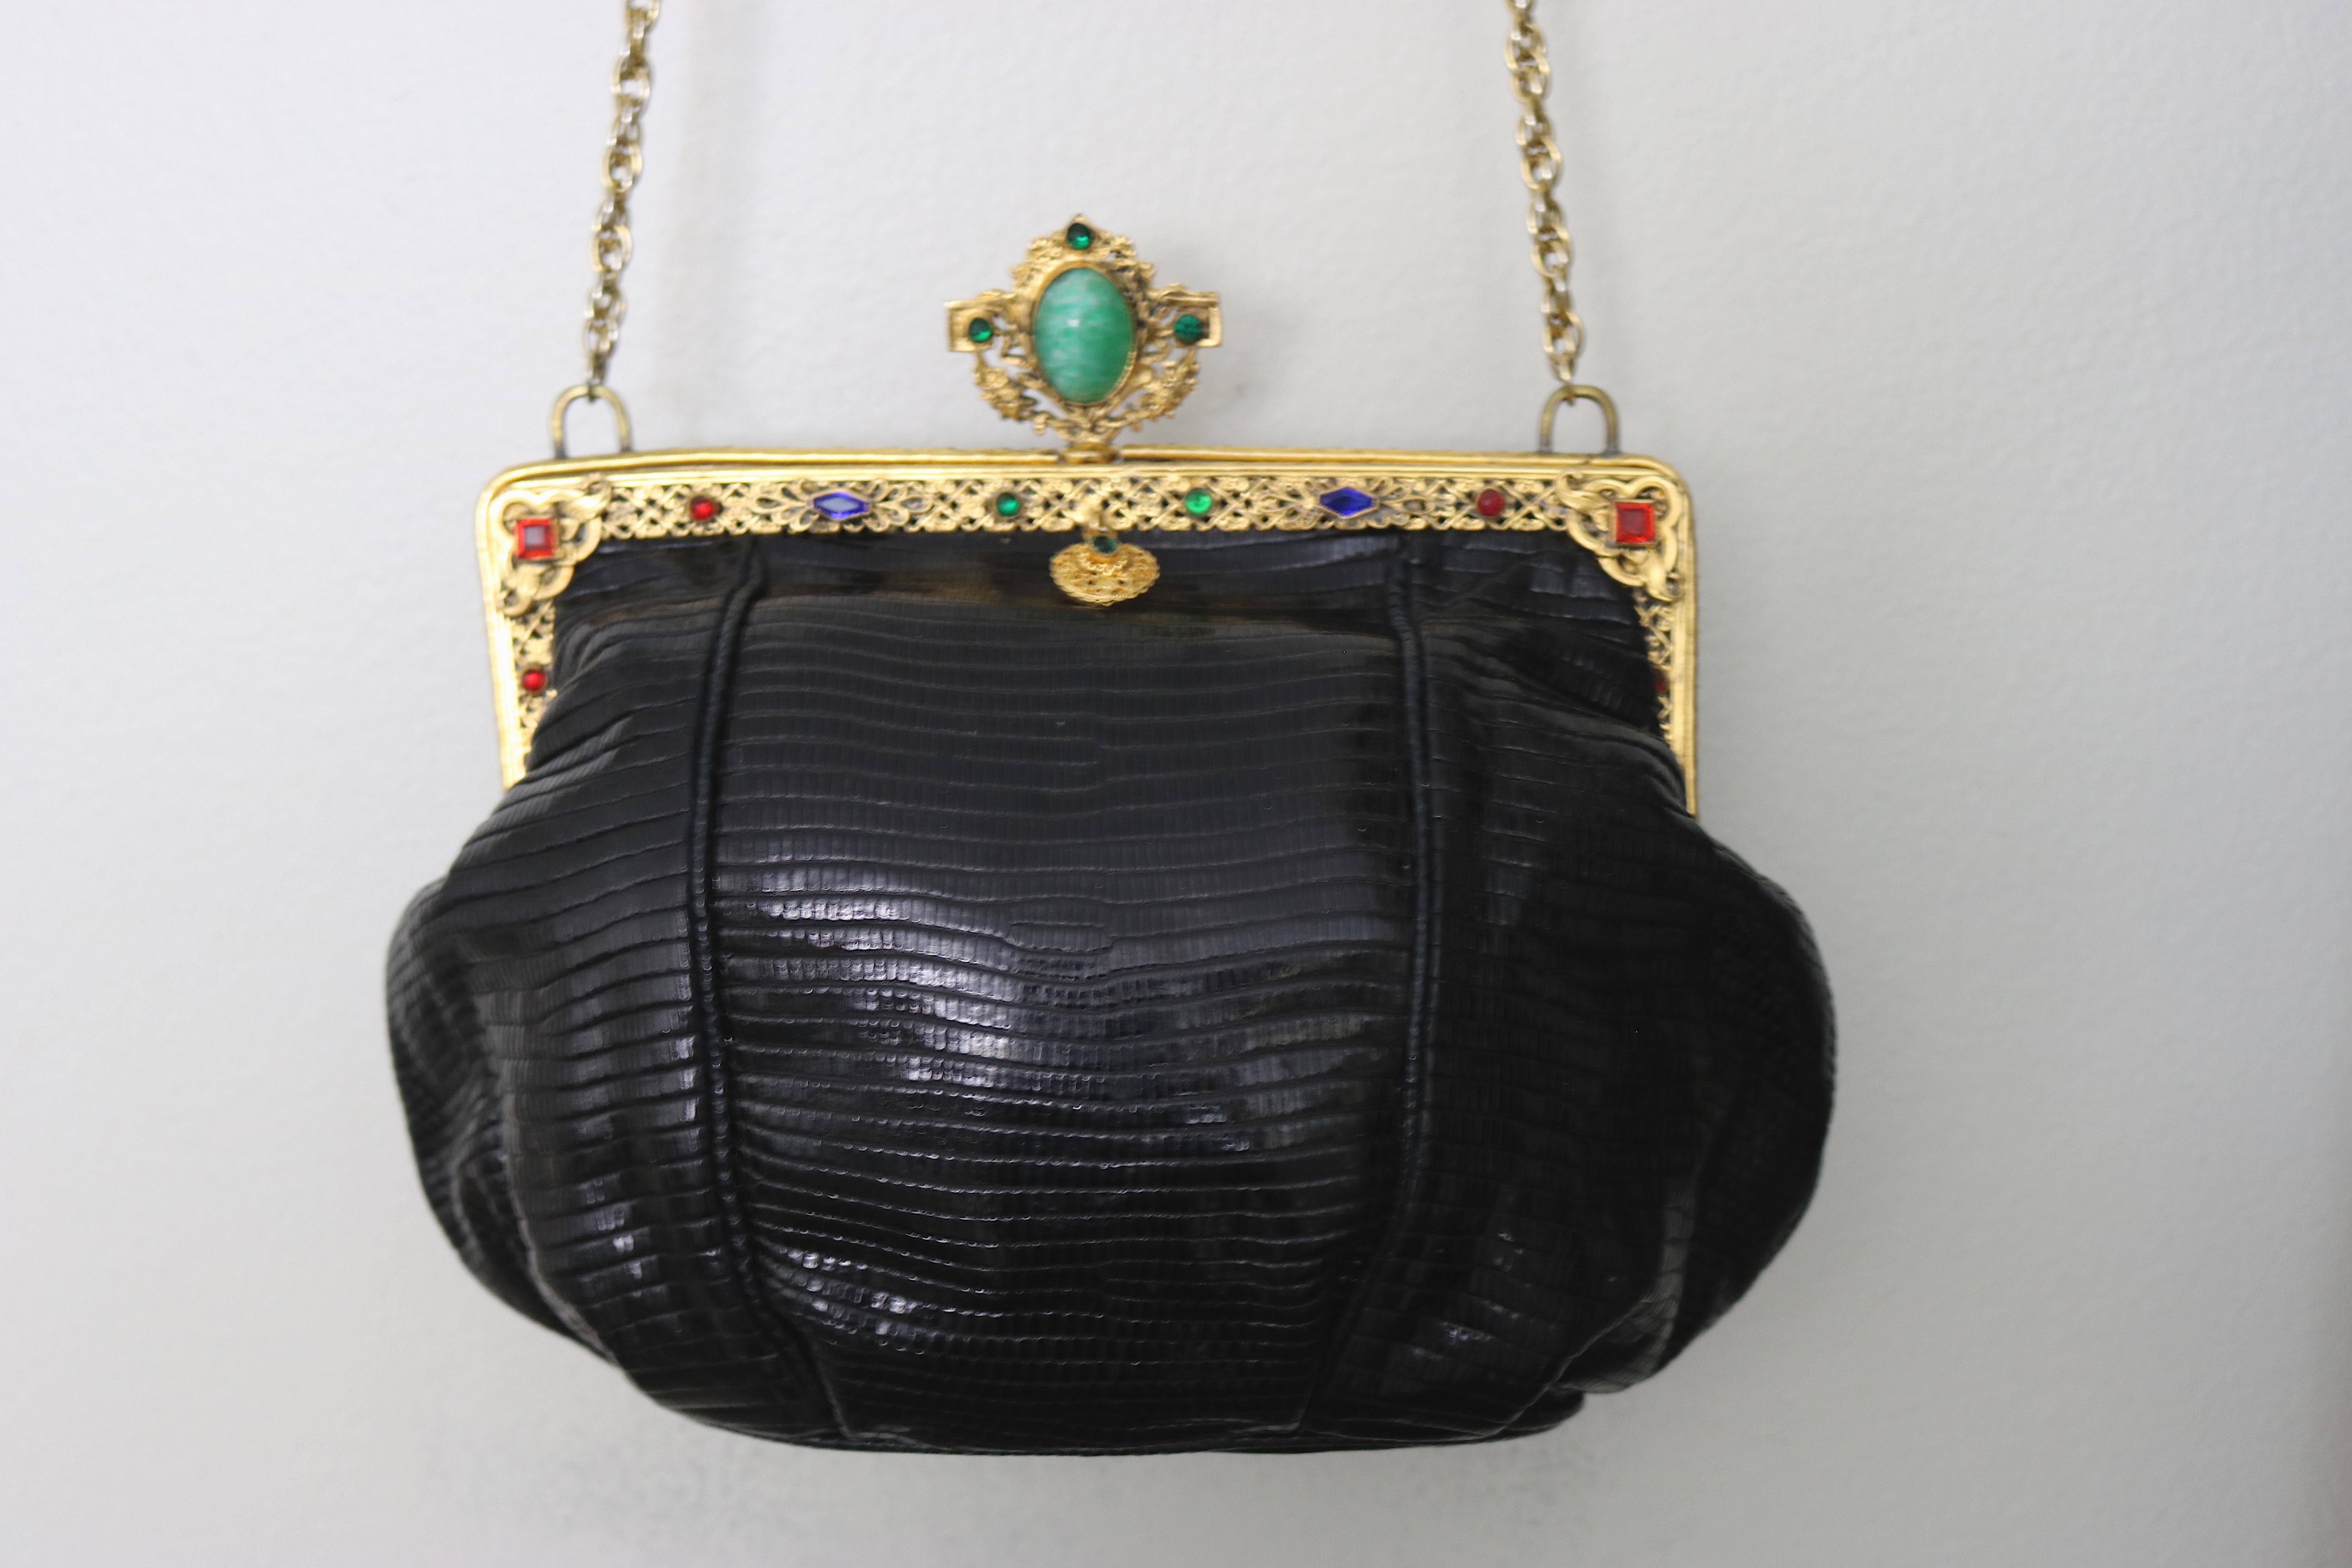 Gorgeous updated for today- lizard black Jeweled Evening Bag designed with a circa 1925 -22 Karat Gold plate Art Nouveau/Art Deco Period Frame with a large floral gold plate surrounded Turquoise Faux Gem Cabochon clasp on top. The frame is